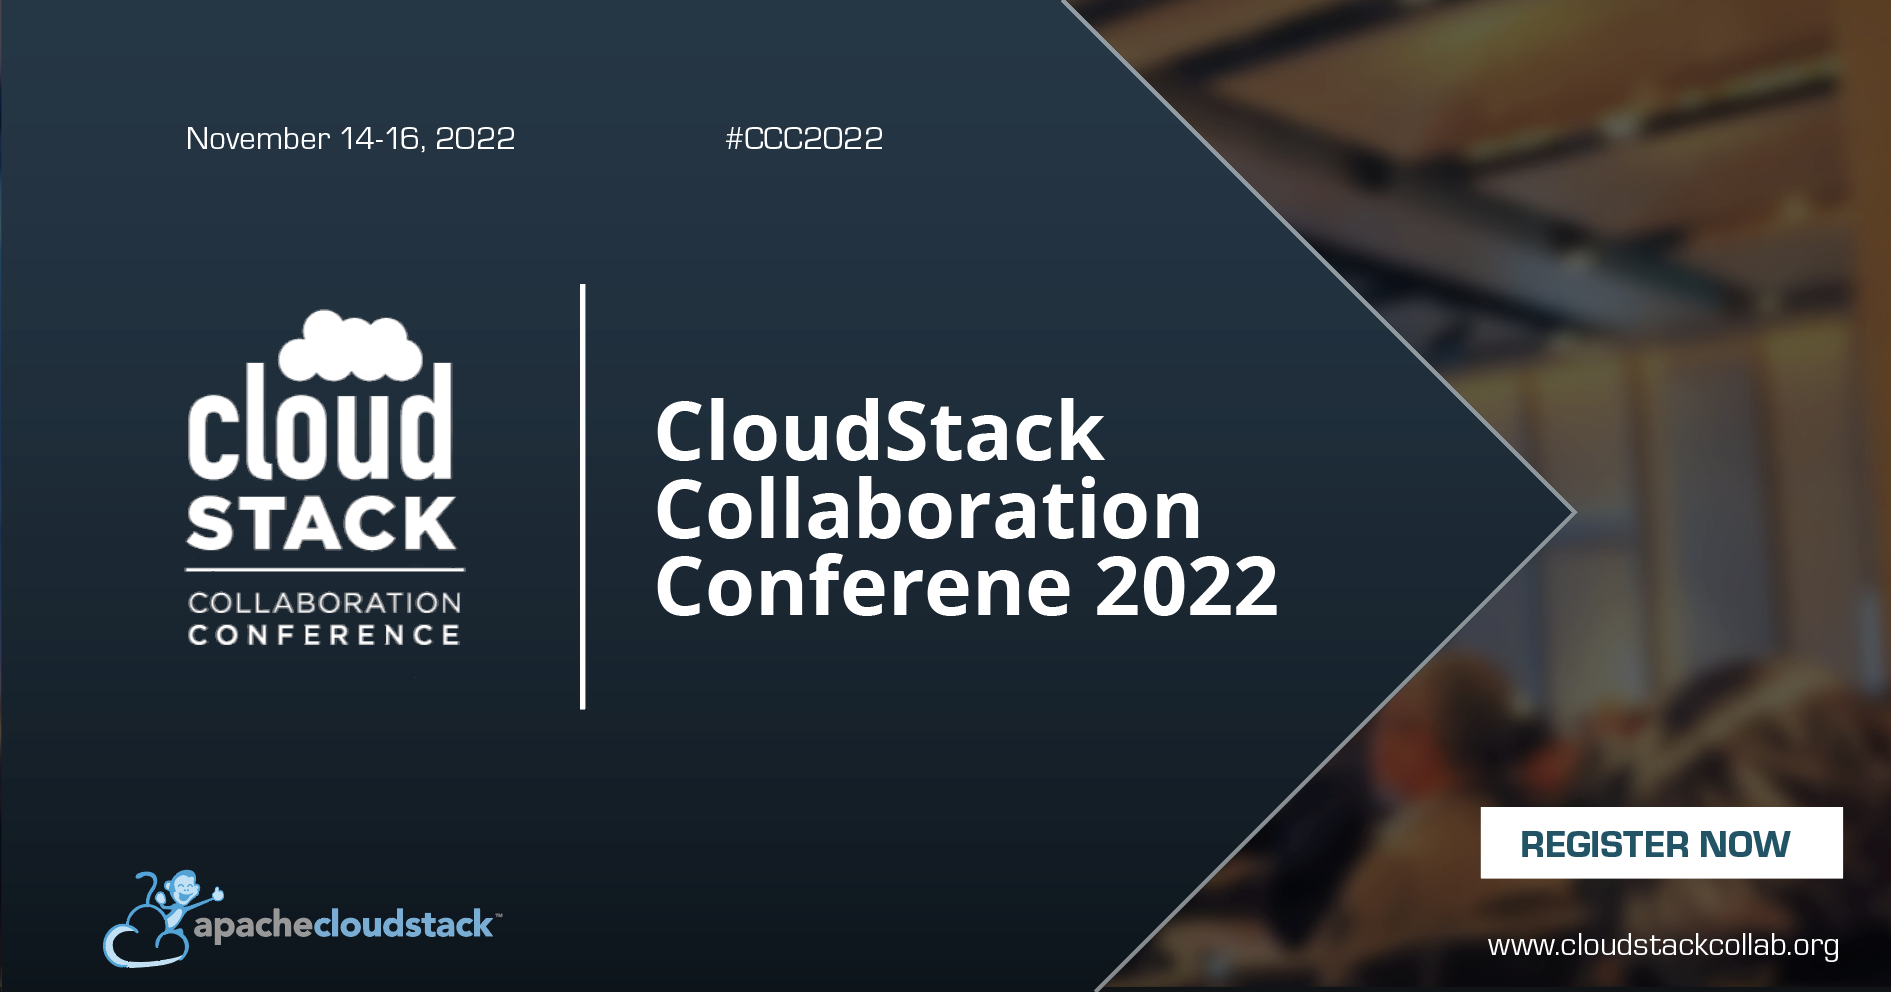 https://blogs.apache.org/cloudstack/entry/cloudstack-collaboration-conference-2022-november